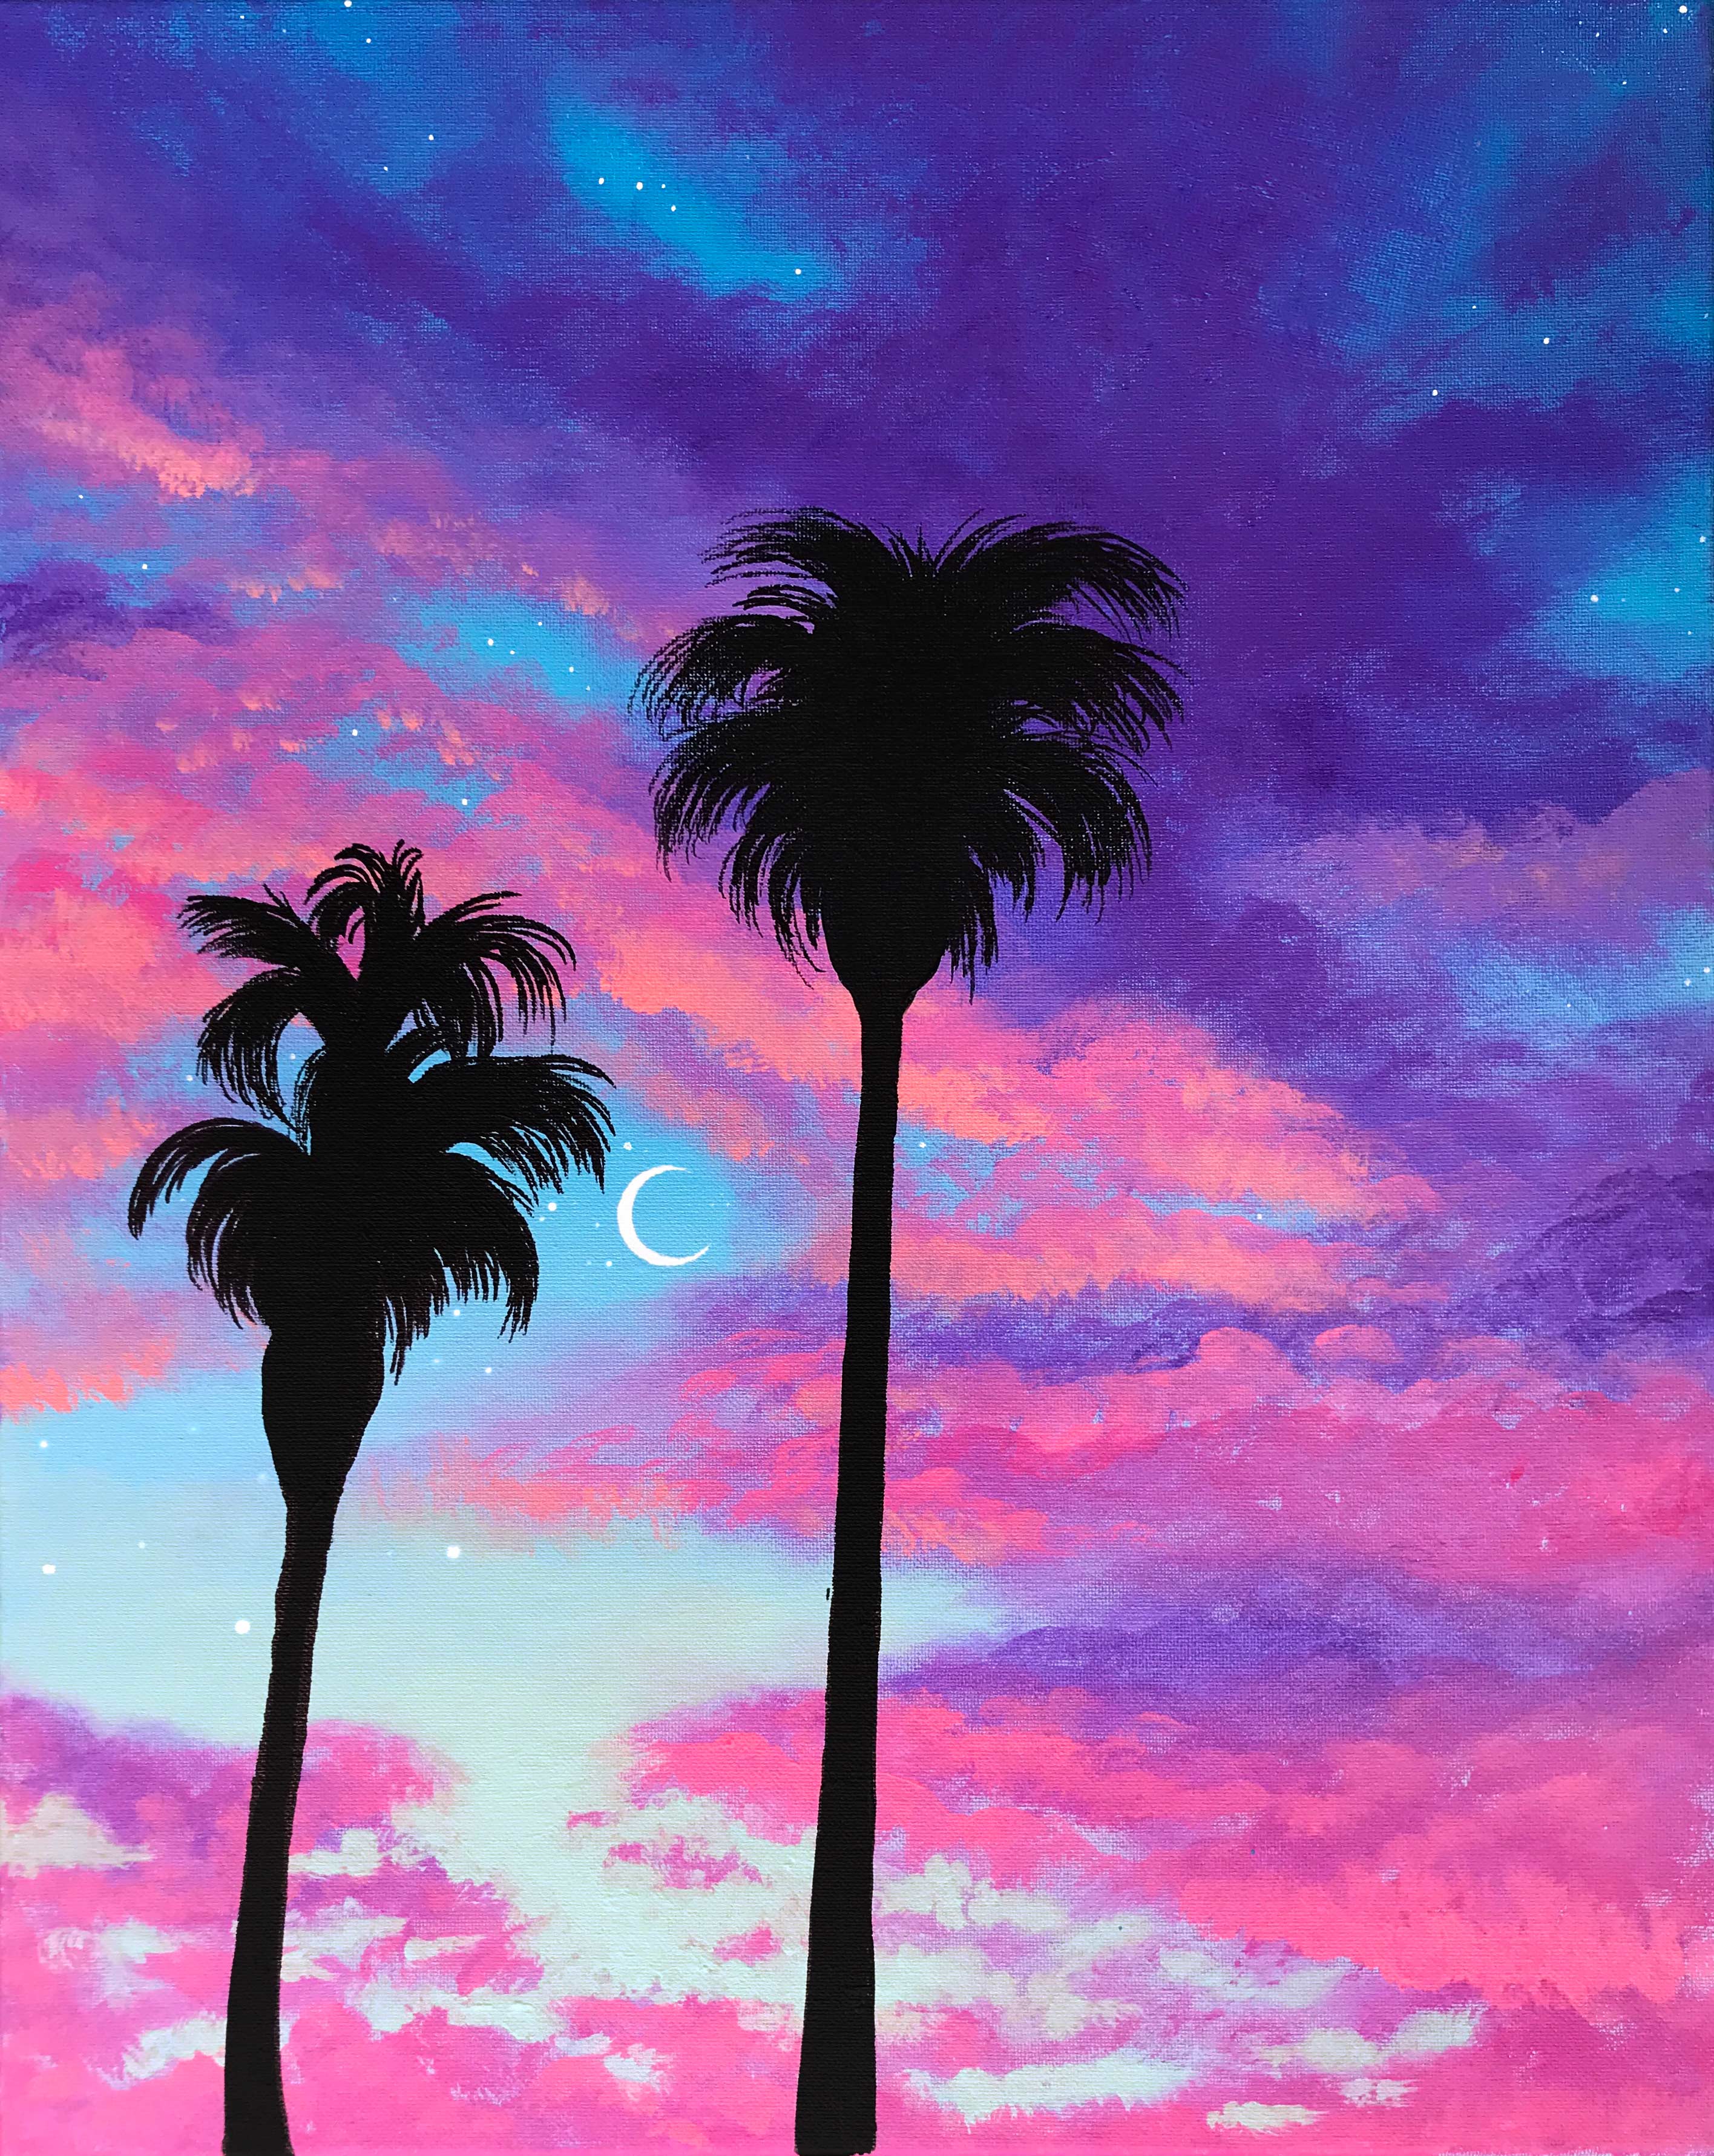 A Palm Tree Sunset Skies experience project by Yaymaker